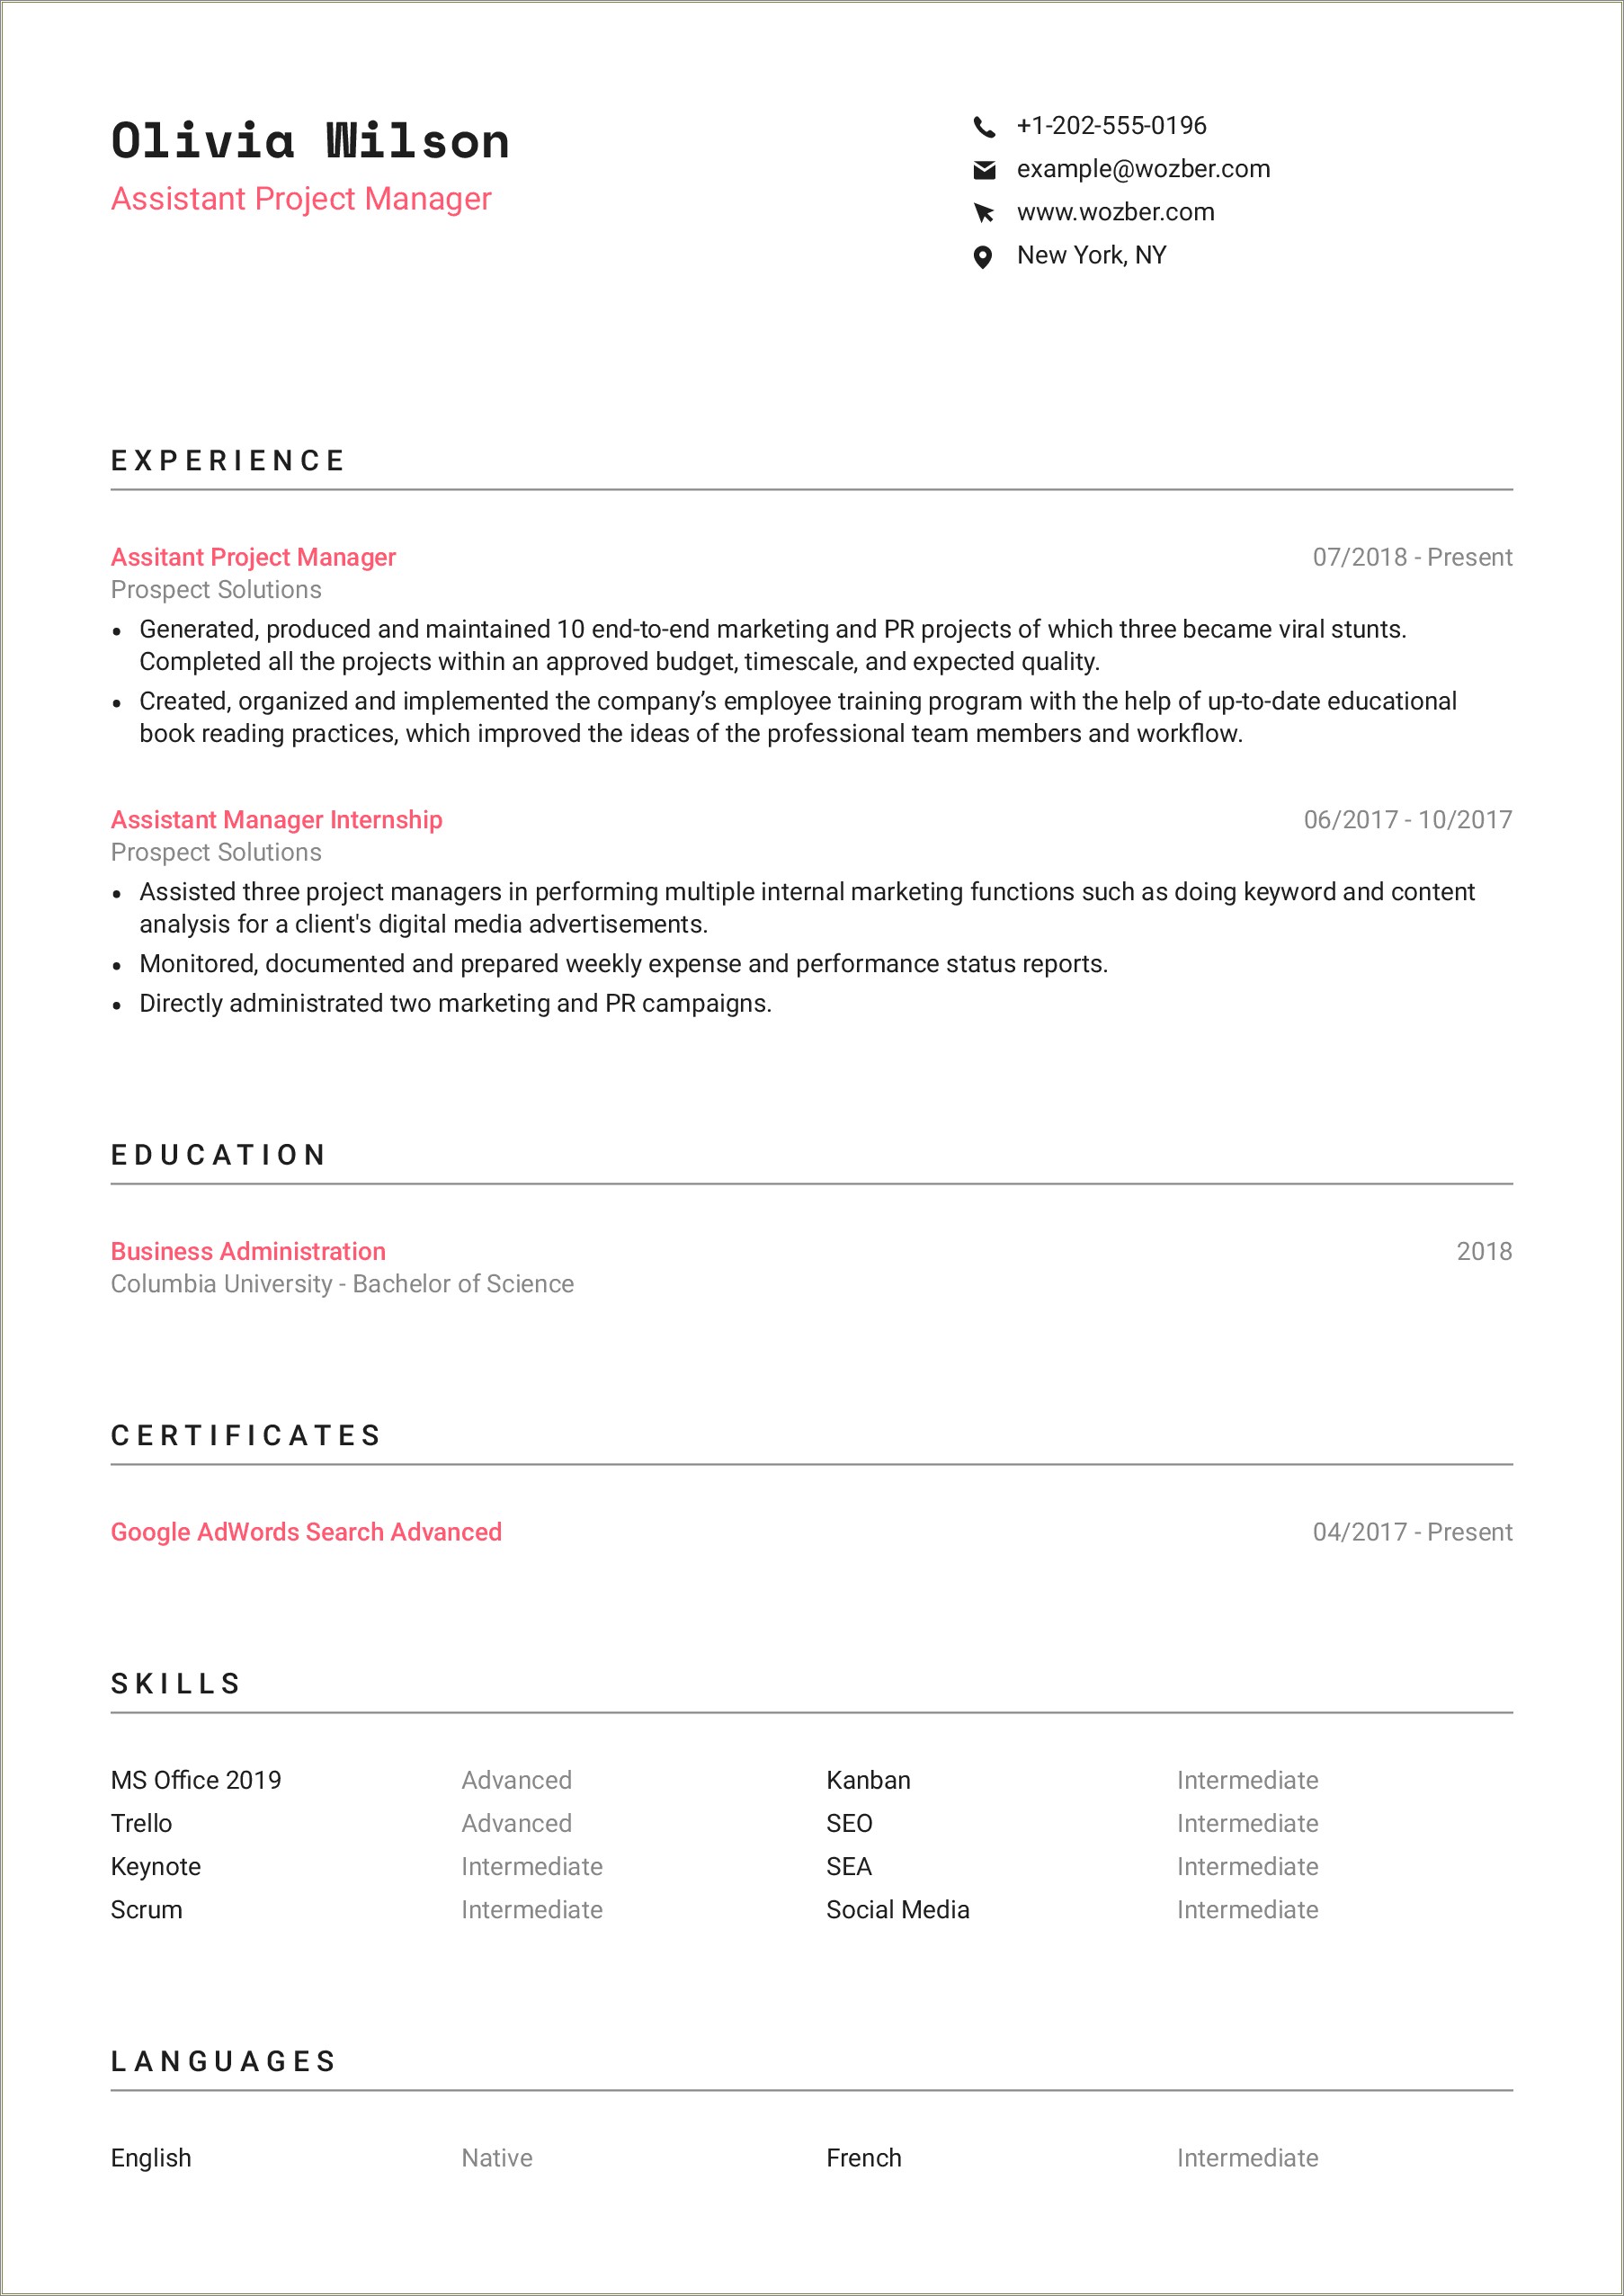 Marketing Manager Resume For A Reacent Graduate